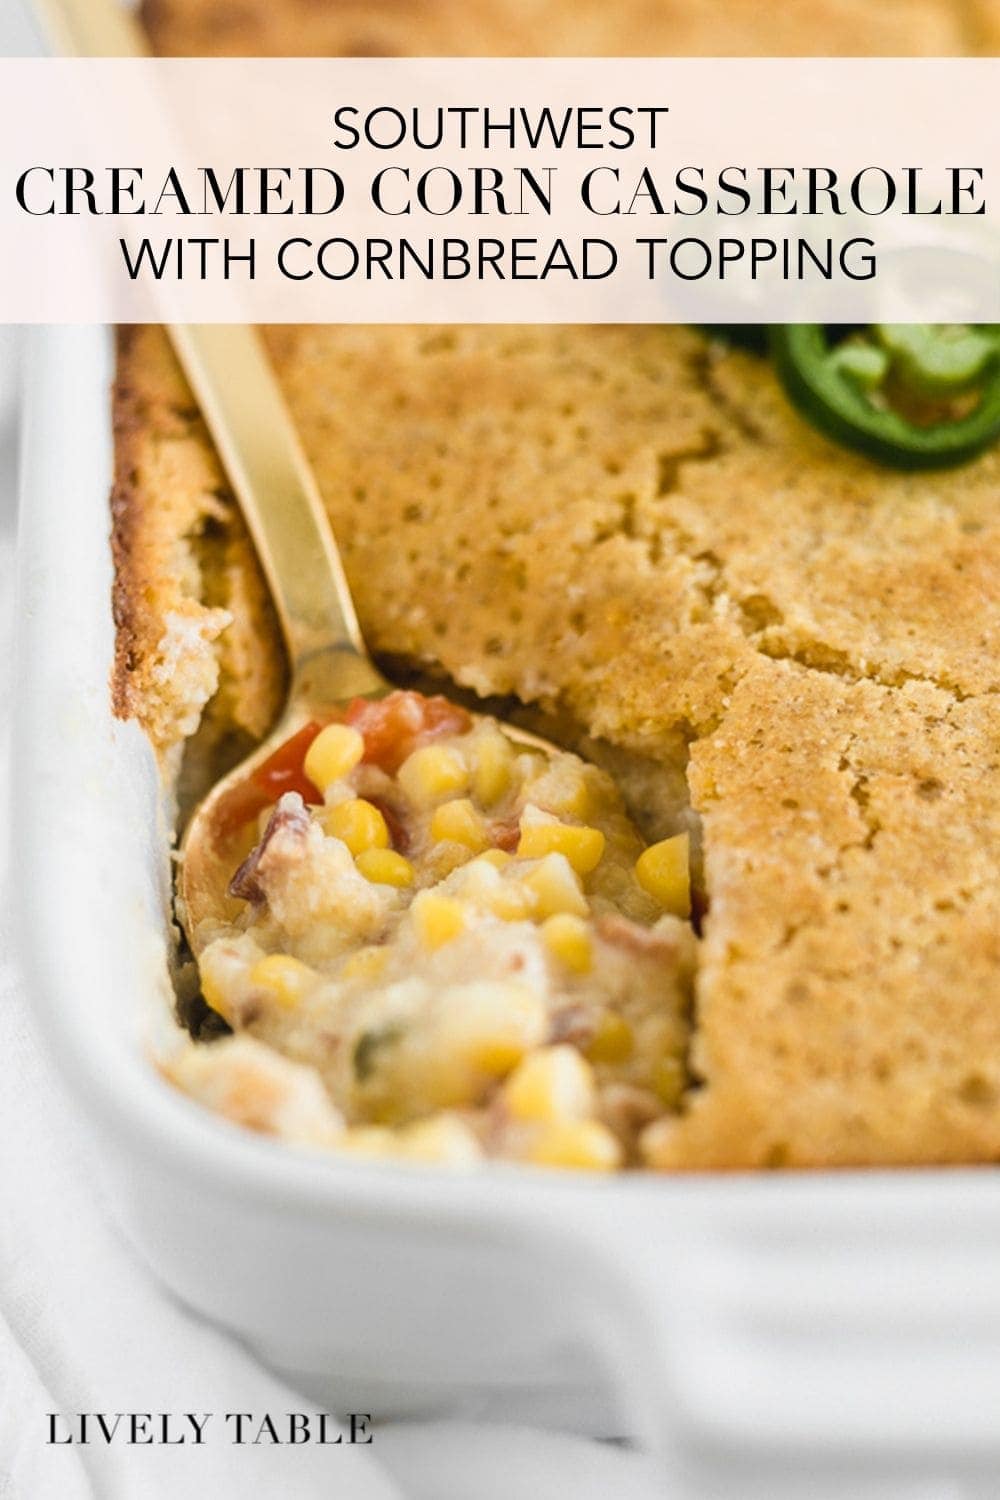 Southwest Creamed Corn Casserole with Cornbread Topping - Lively Table